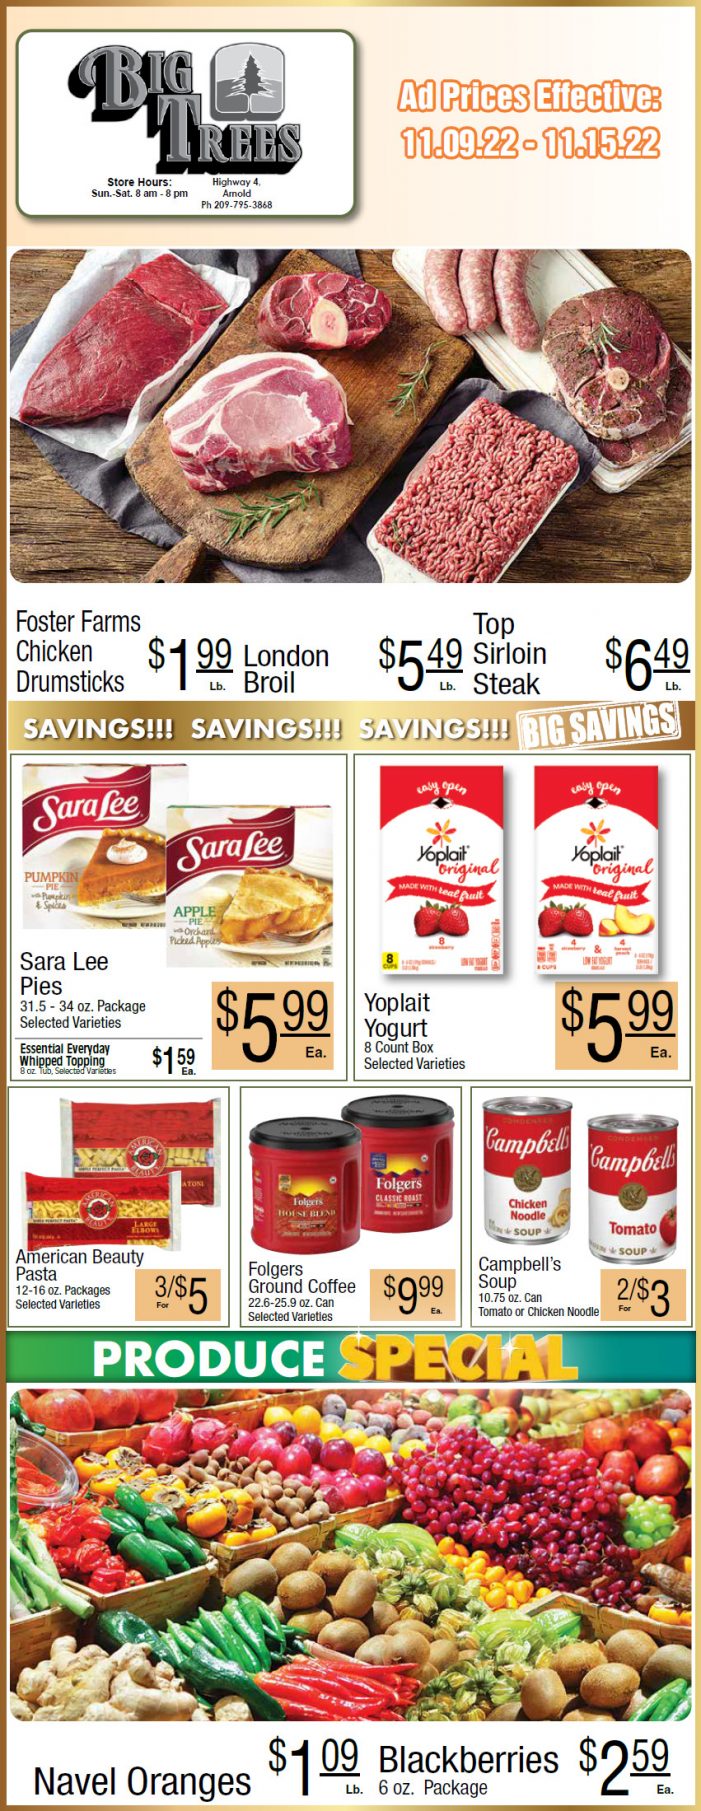 Big Trees Market Weekly Ad & Grocery Specials November 9 – 15!  Shop Local & Save!!